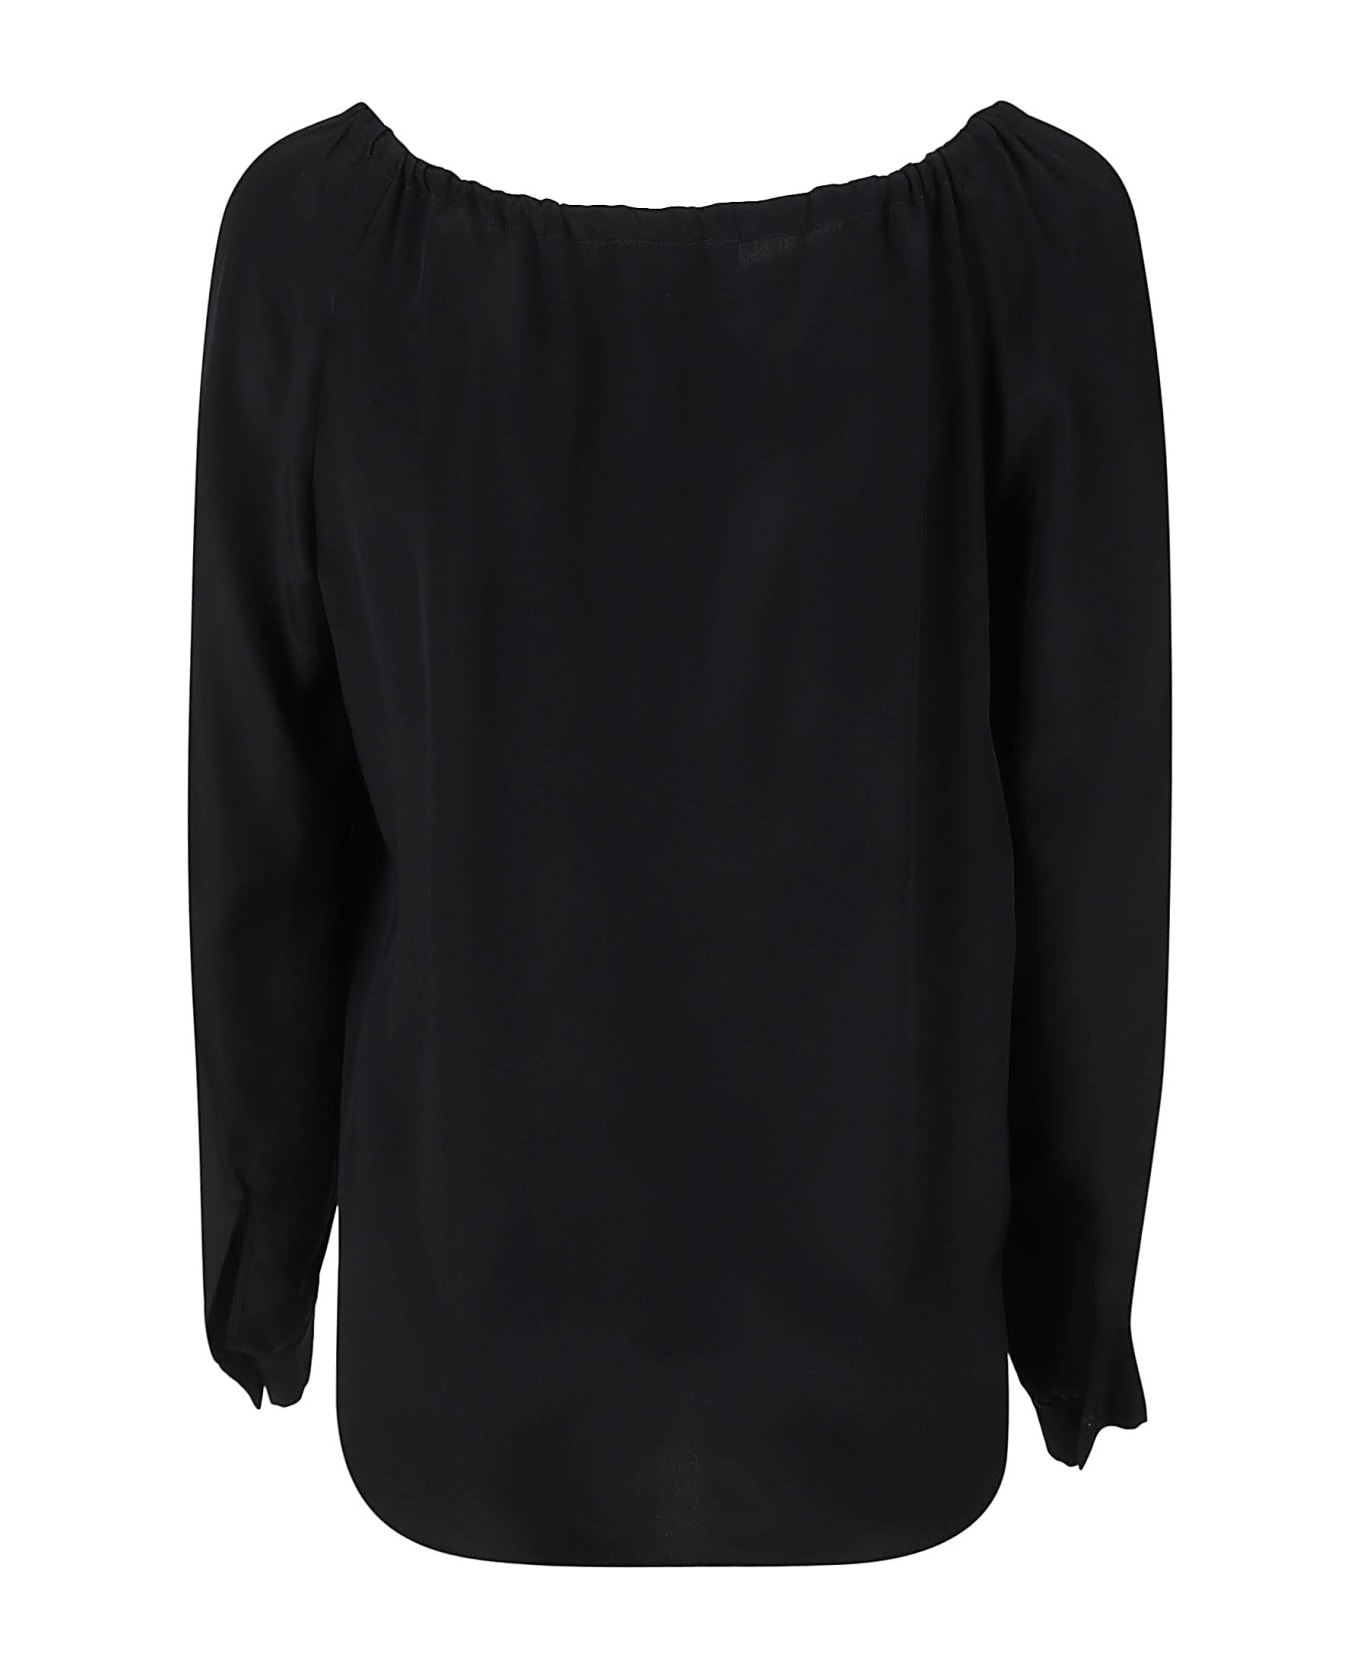 Boutique Moschino Boat Neck Blouse - Black ブラウス